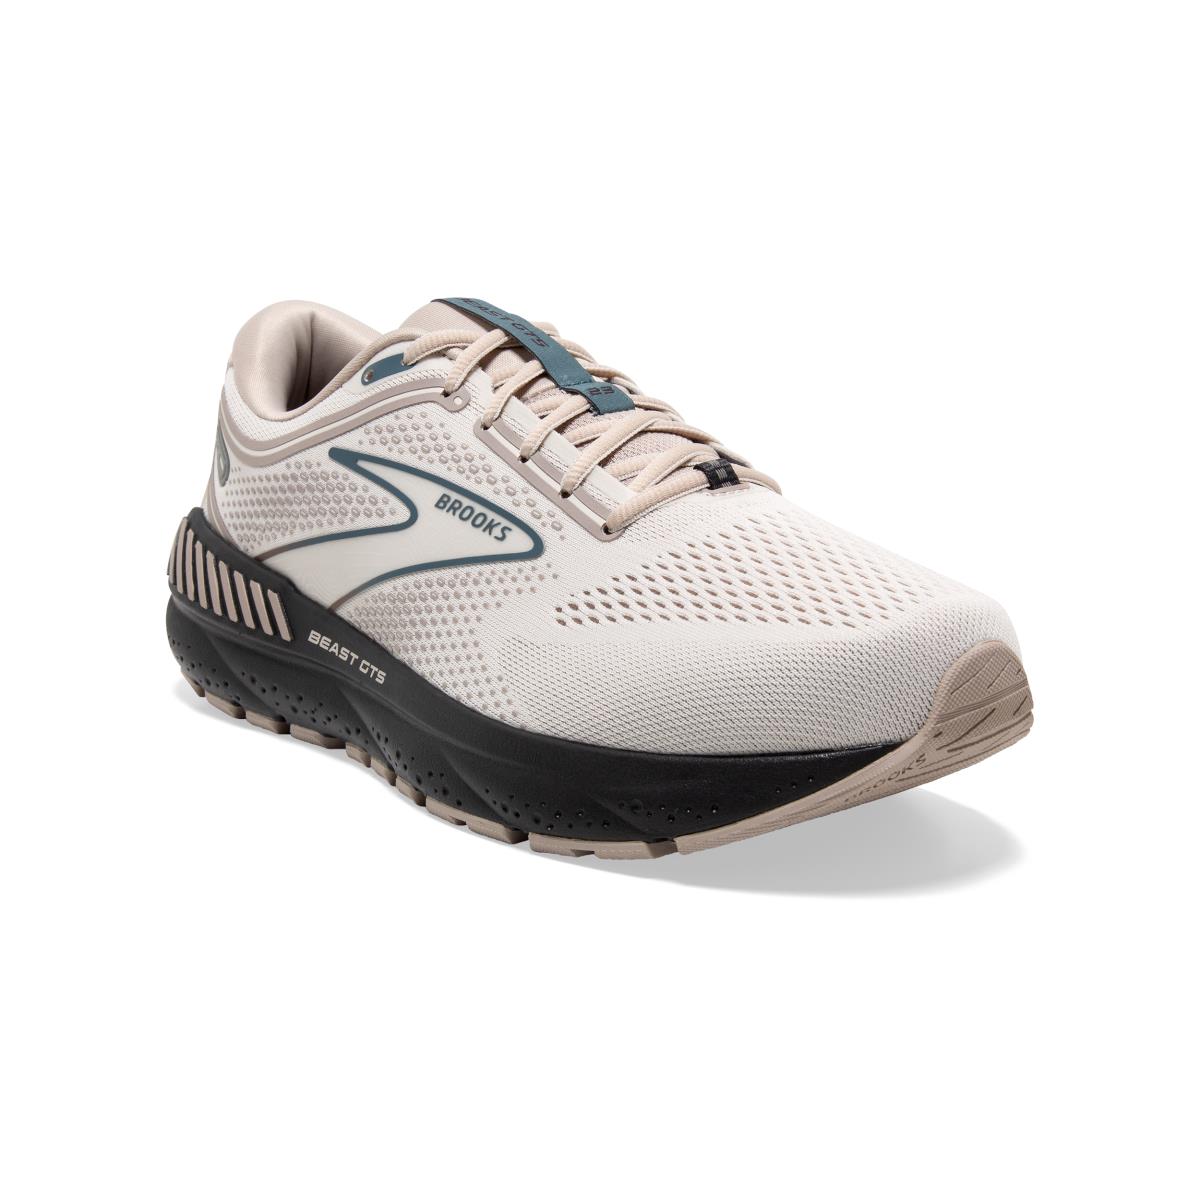 Brooks Beast Gts 23 Men`s Road Running Shoes Chateau Grey/White Sand/Blue